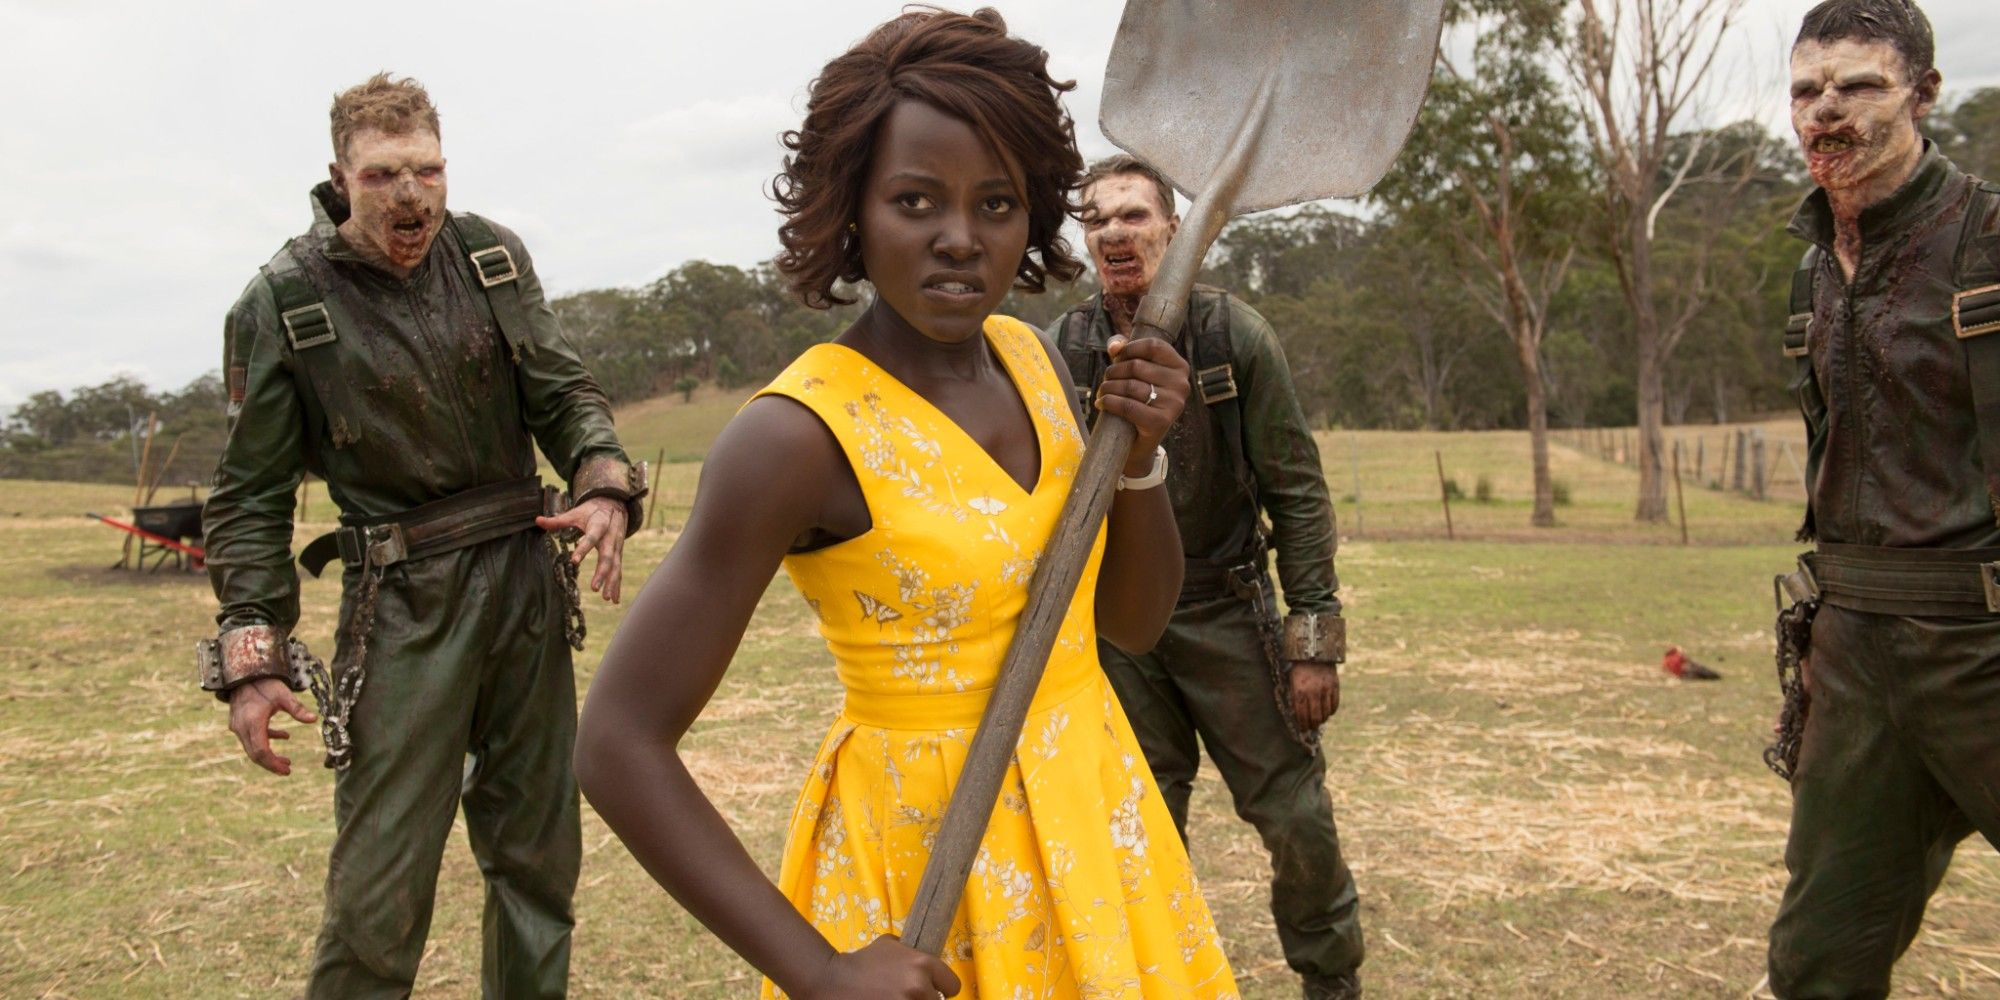 Lupita Nyong'o wielding a shovel against zombies in Little Monsters.